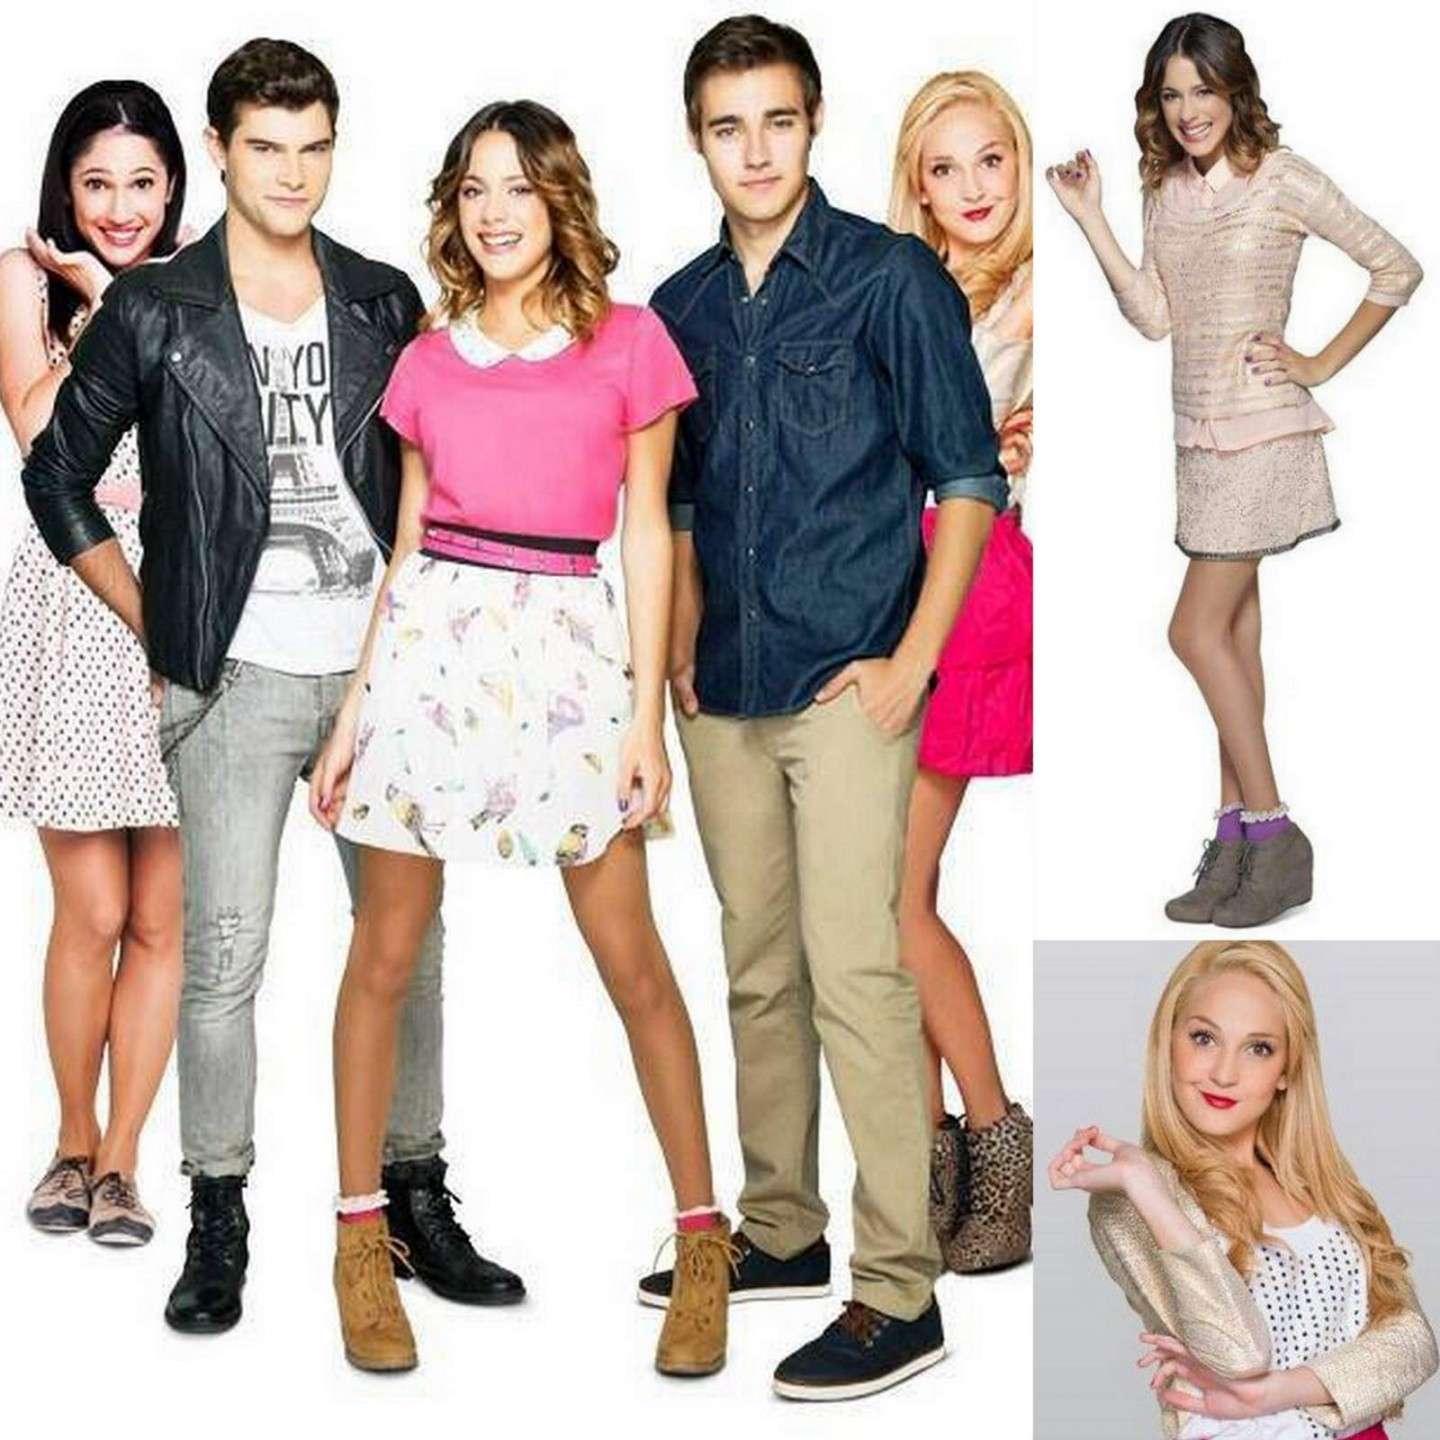 Violetta outfit